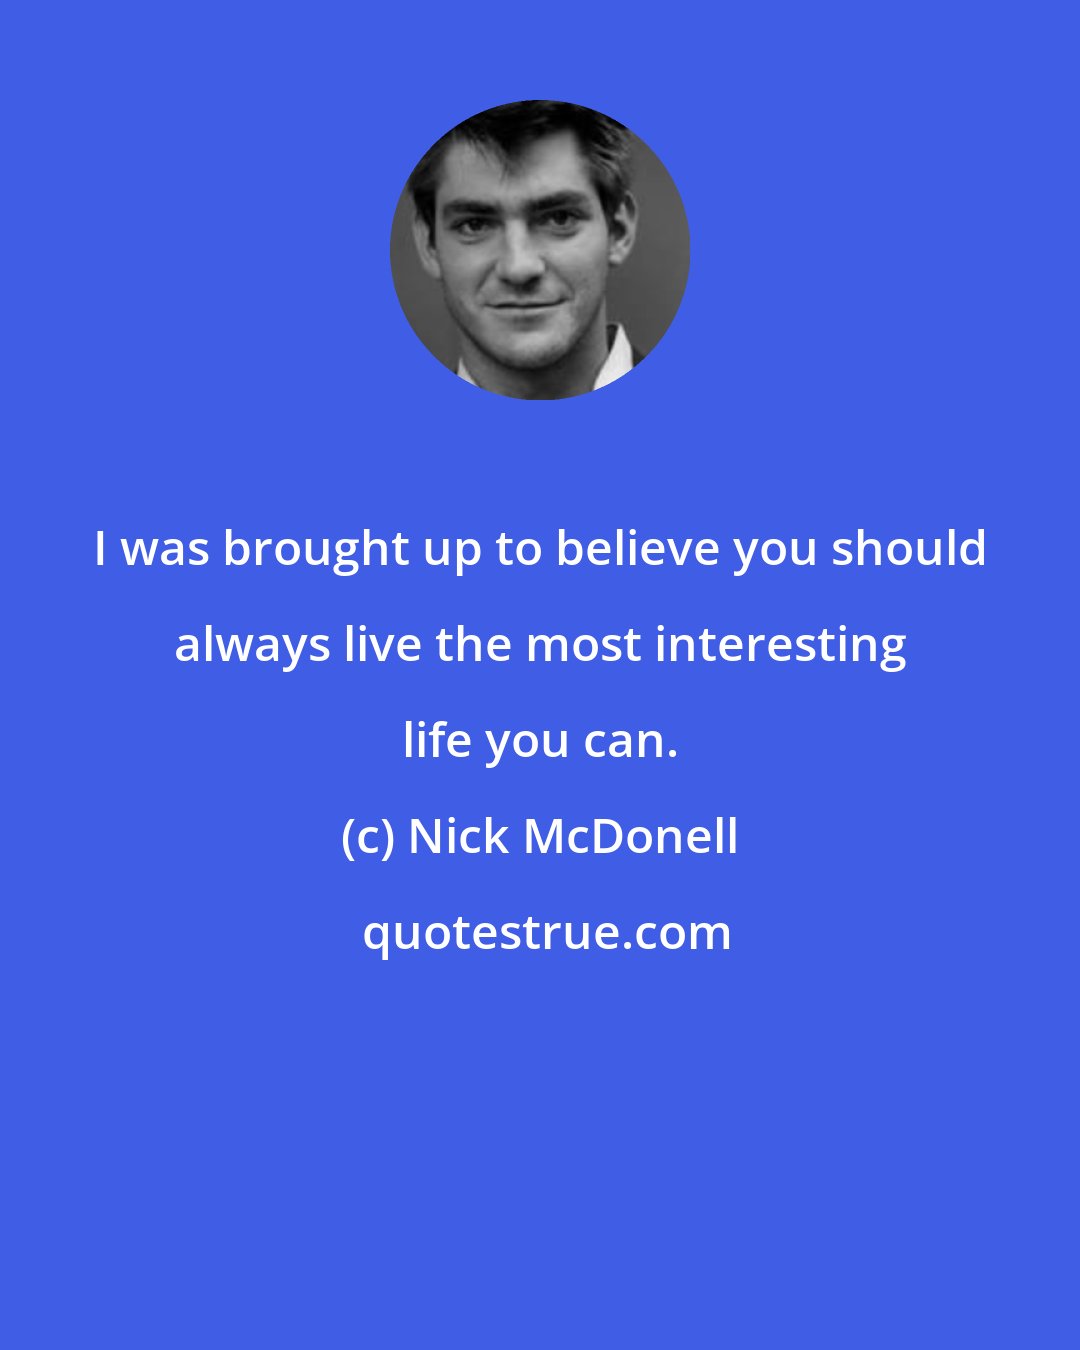 Nick McDonell: I was brought up to believe you should always live the most interesting life you can.